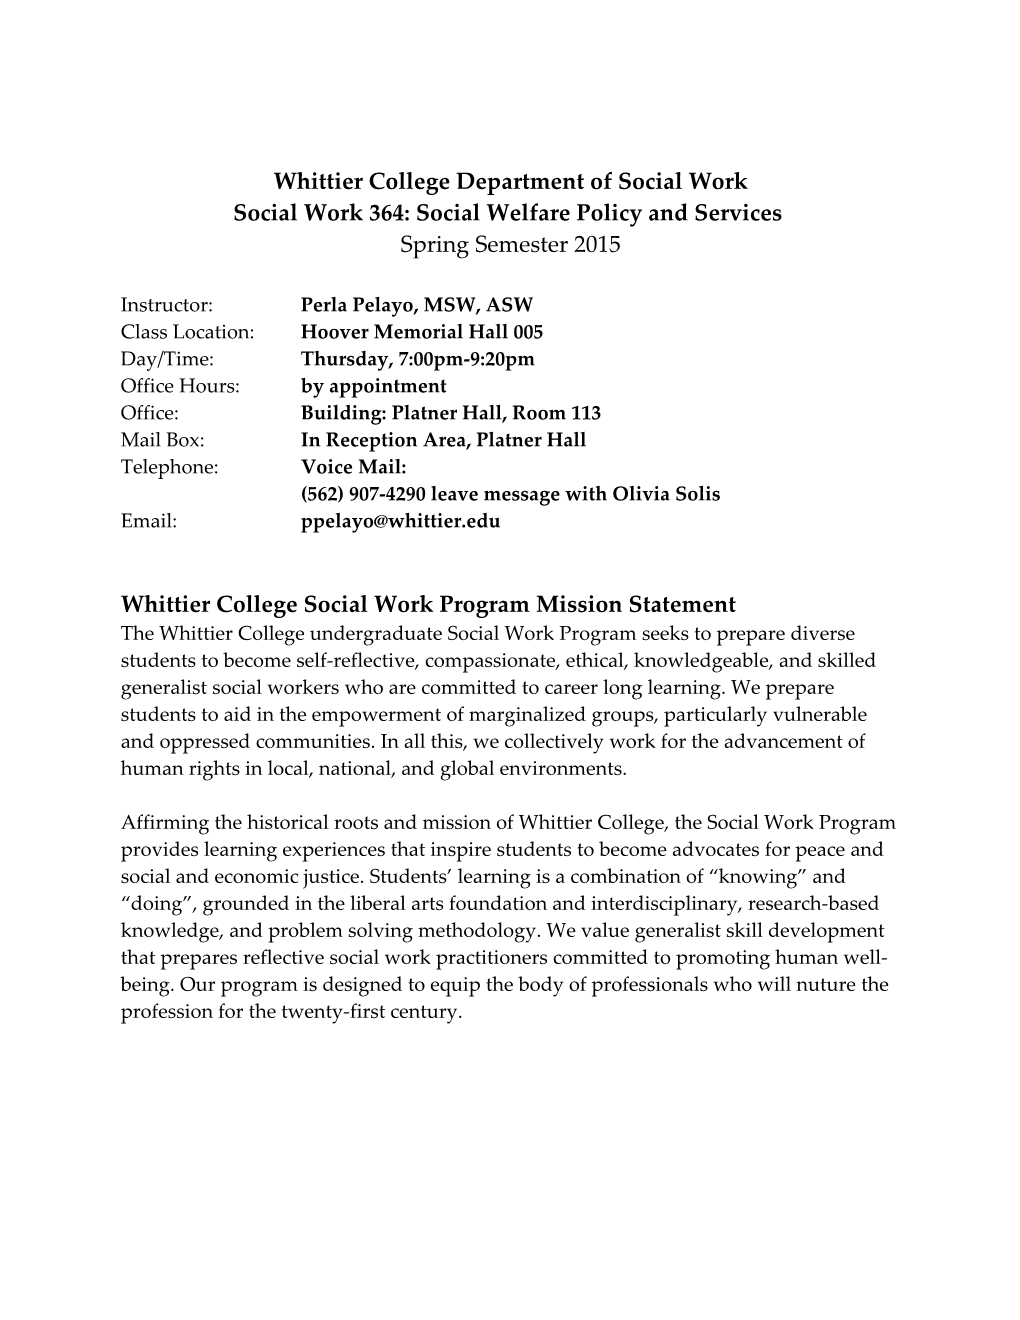 Whittier College Department of Social Work s1